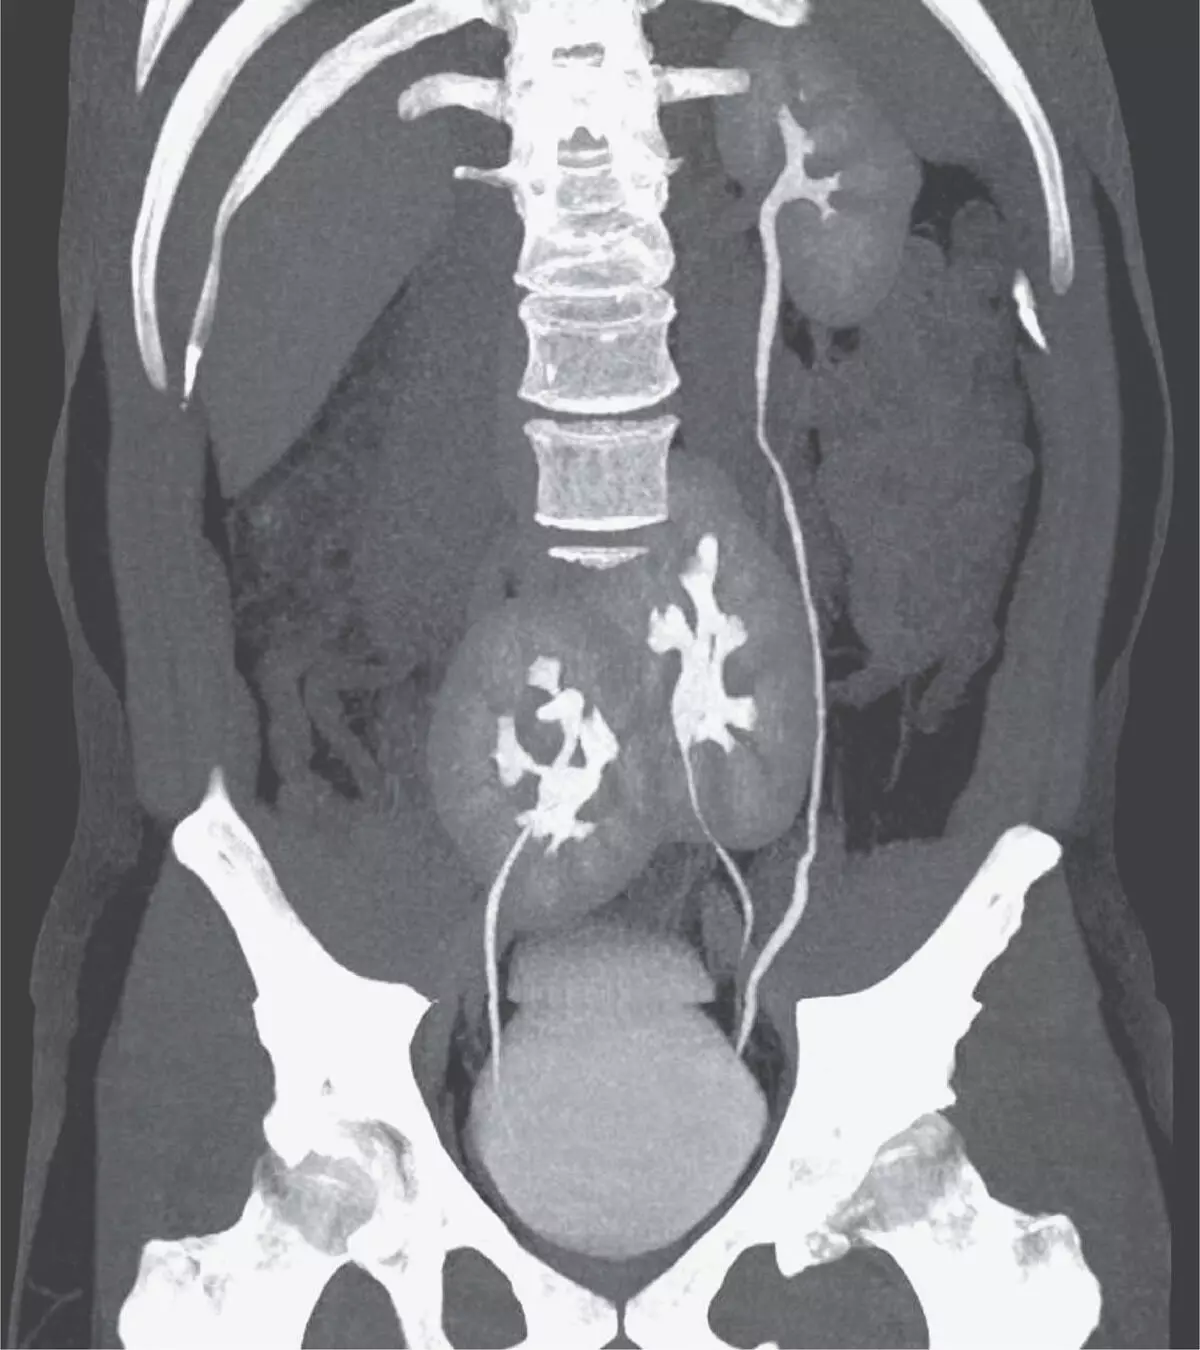 Rare case of three kidneys reported in NEJM